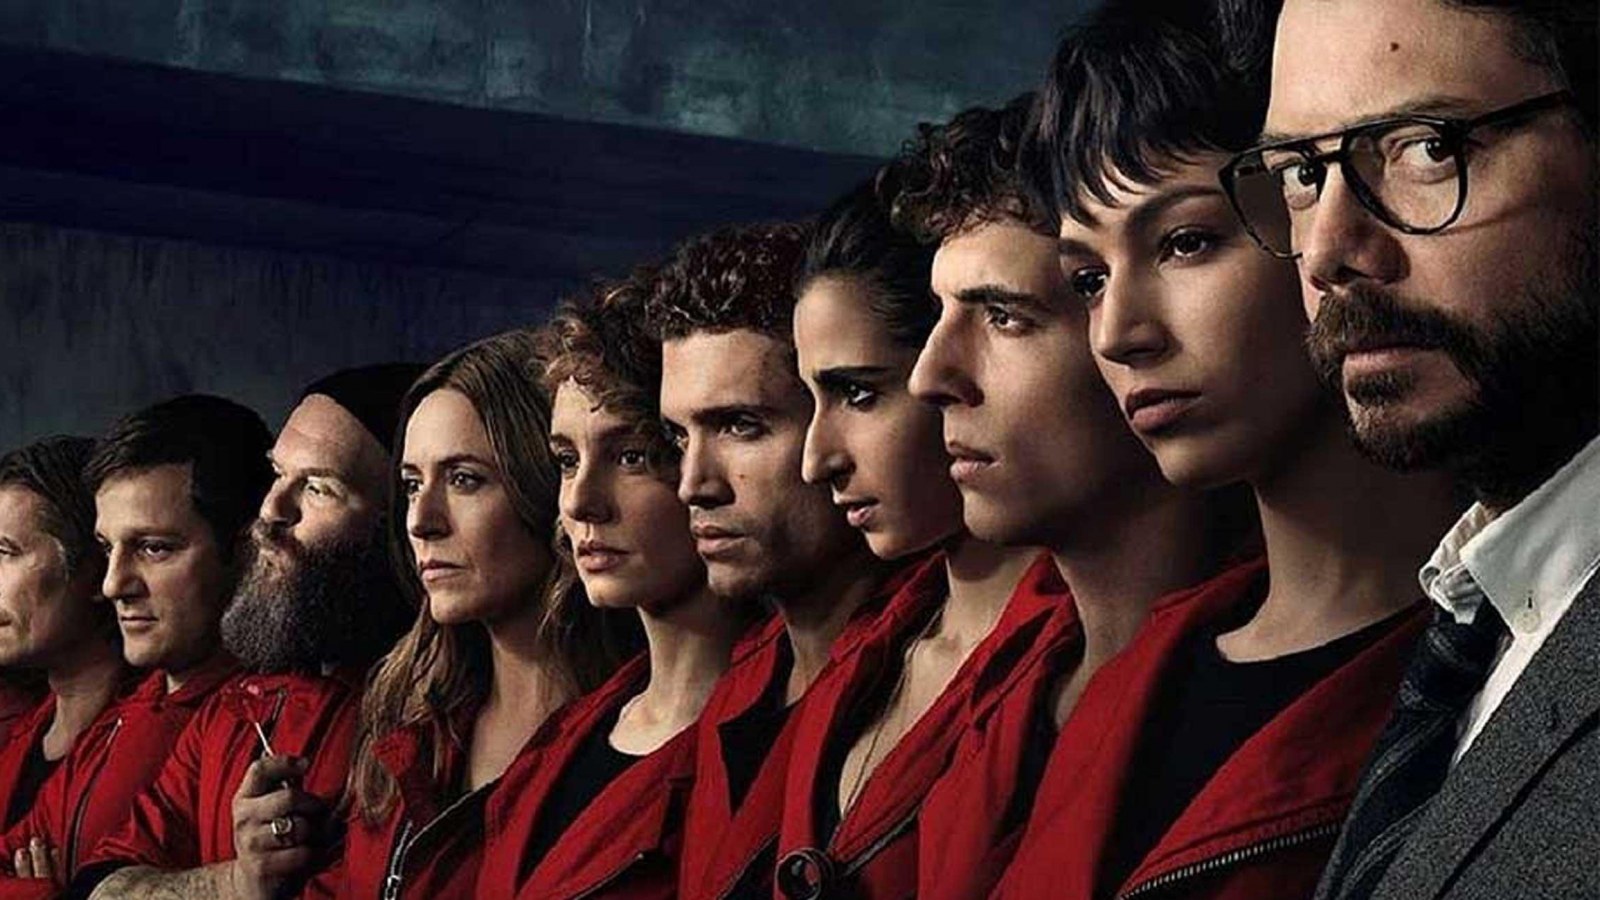 Money Heist Season 5 Production Update: Filming Close To Wrap